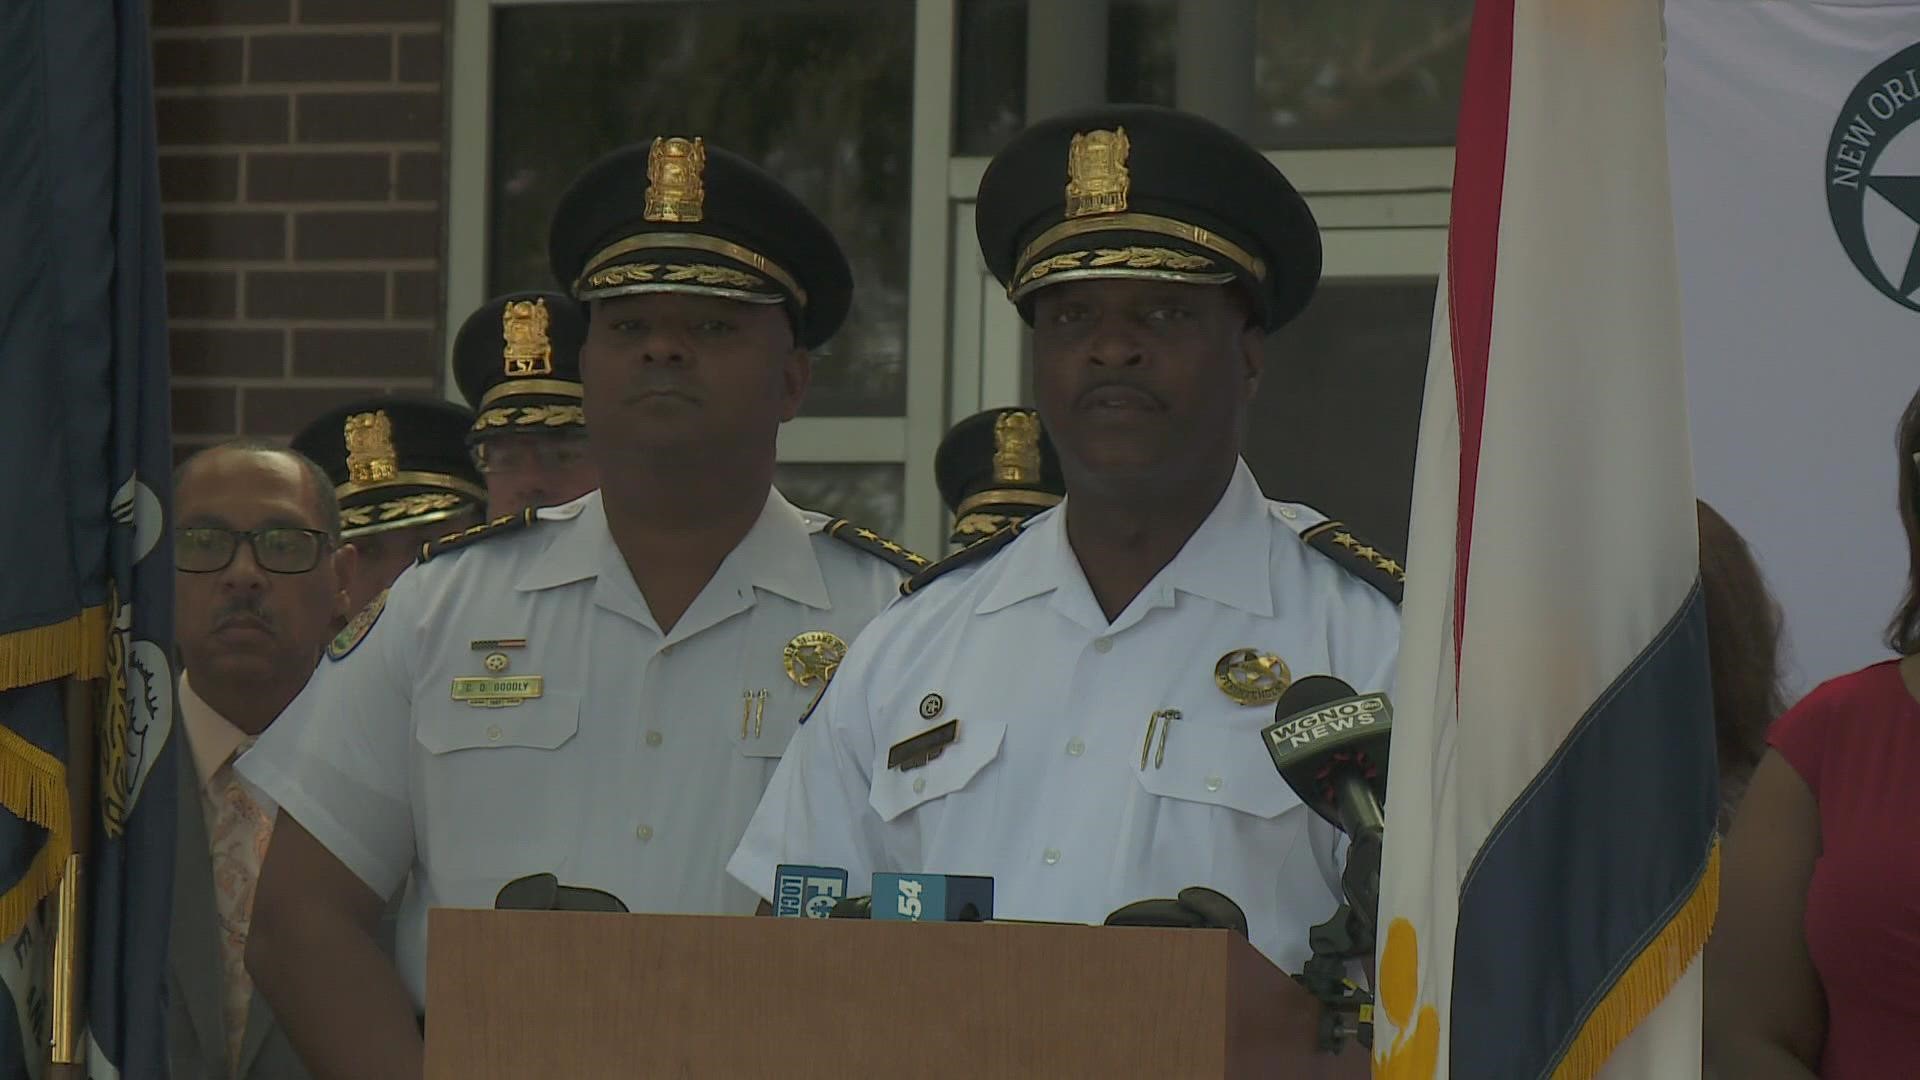 Memo from NOPD Superintendent Shaun Ferguson launches effort by naming Fausto Pichardo as “consulting Chief of Operations”